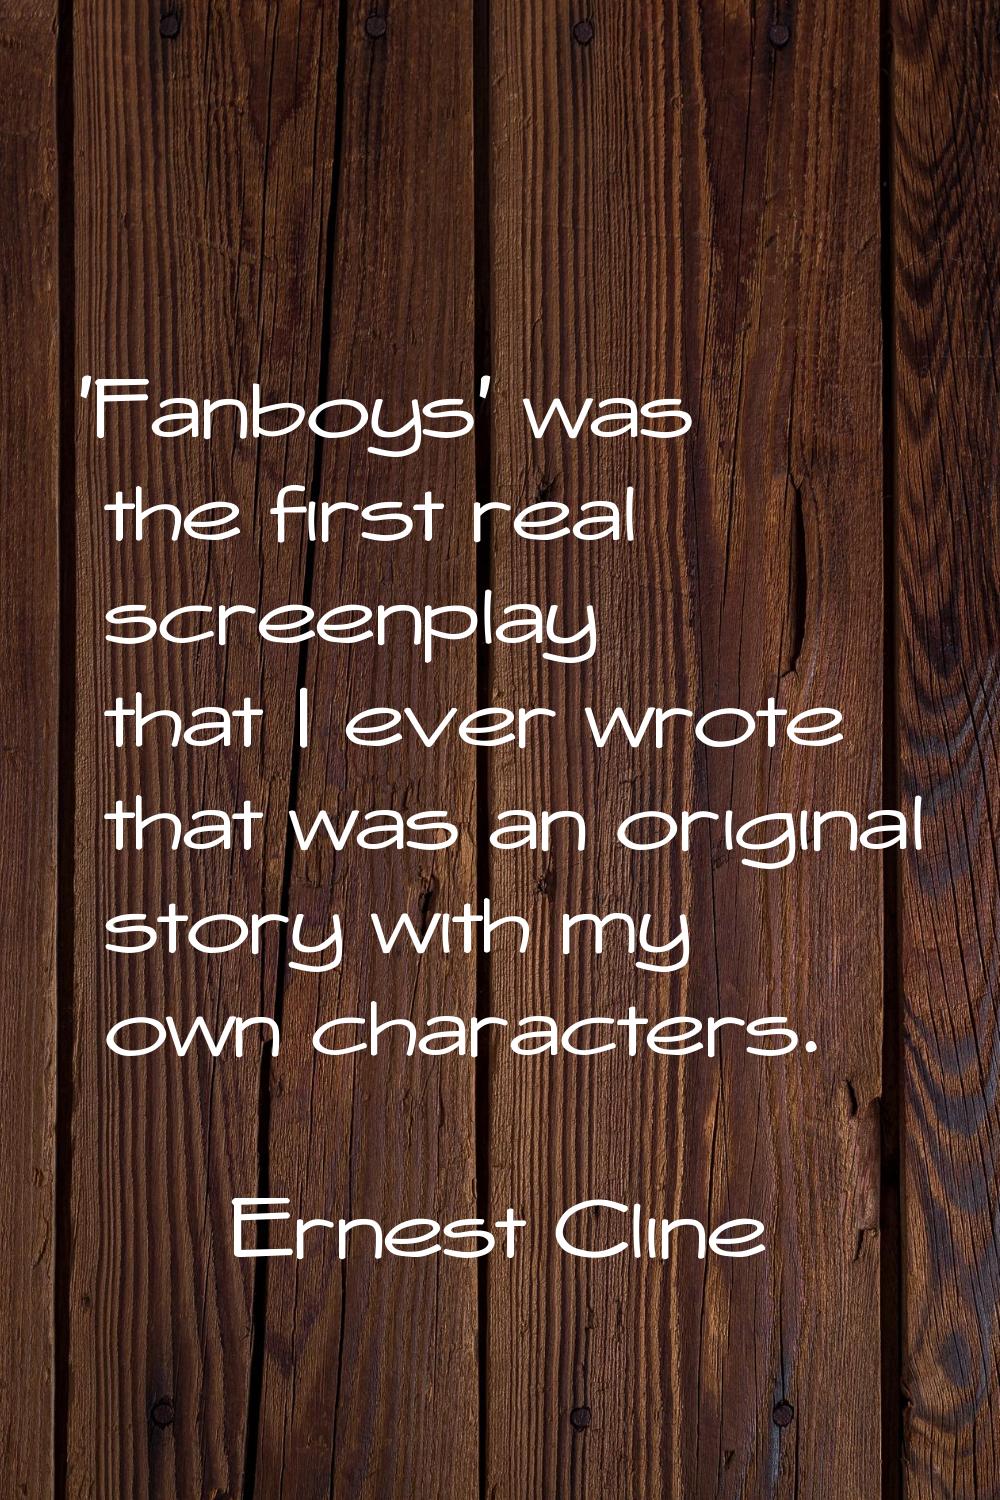 'Fanboys' was the first real screenplay that I ever wrote that was an original story with my own ch